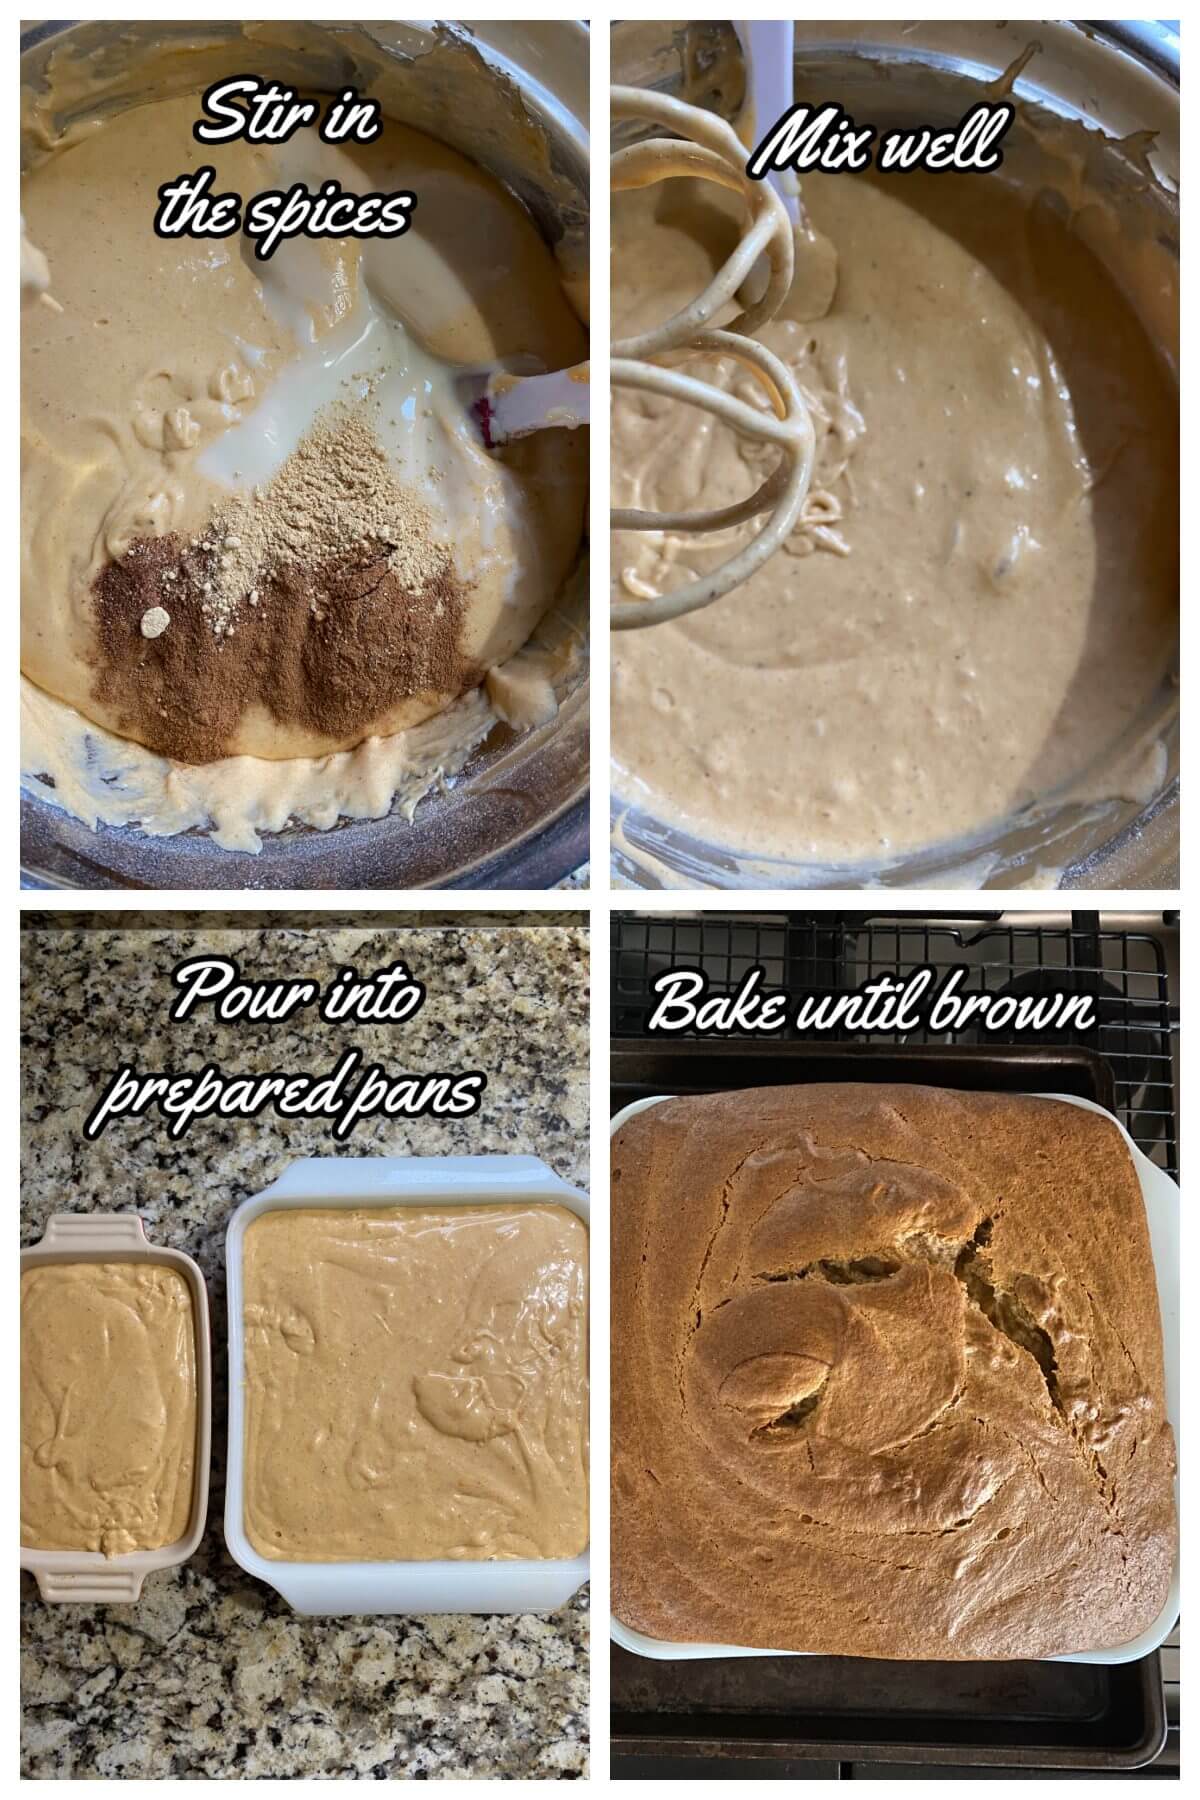 Direction collage for Persimmon Pudding steps 5-8